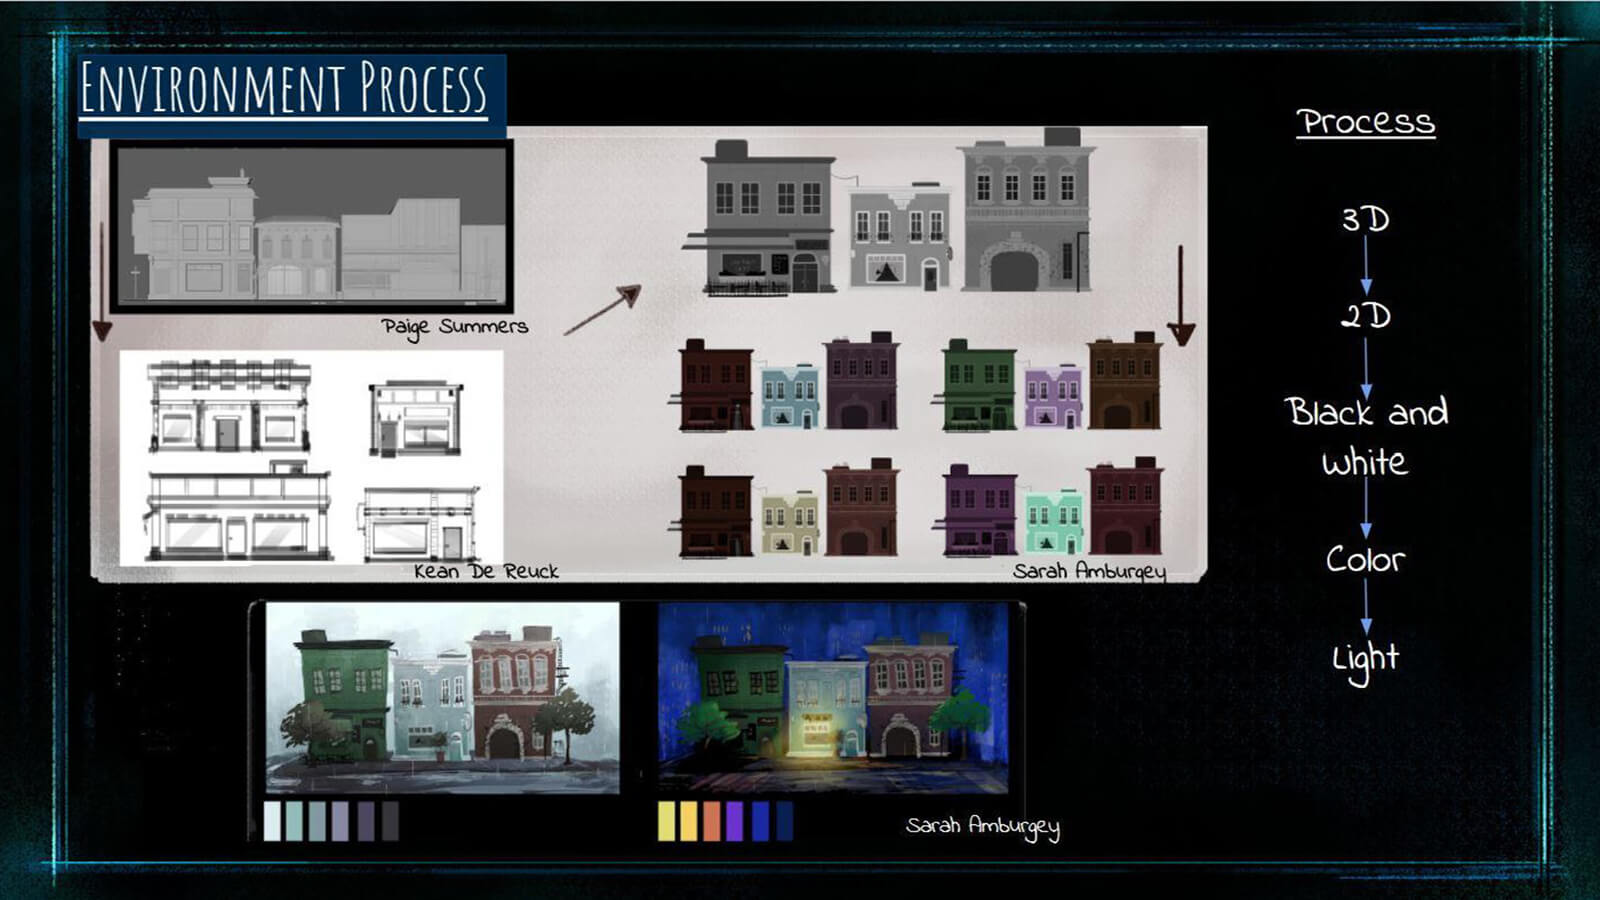 An "Environment Process" slide, showing the pipeline the team settled on for developing the film's backgrounds.